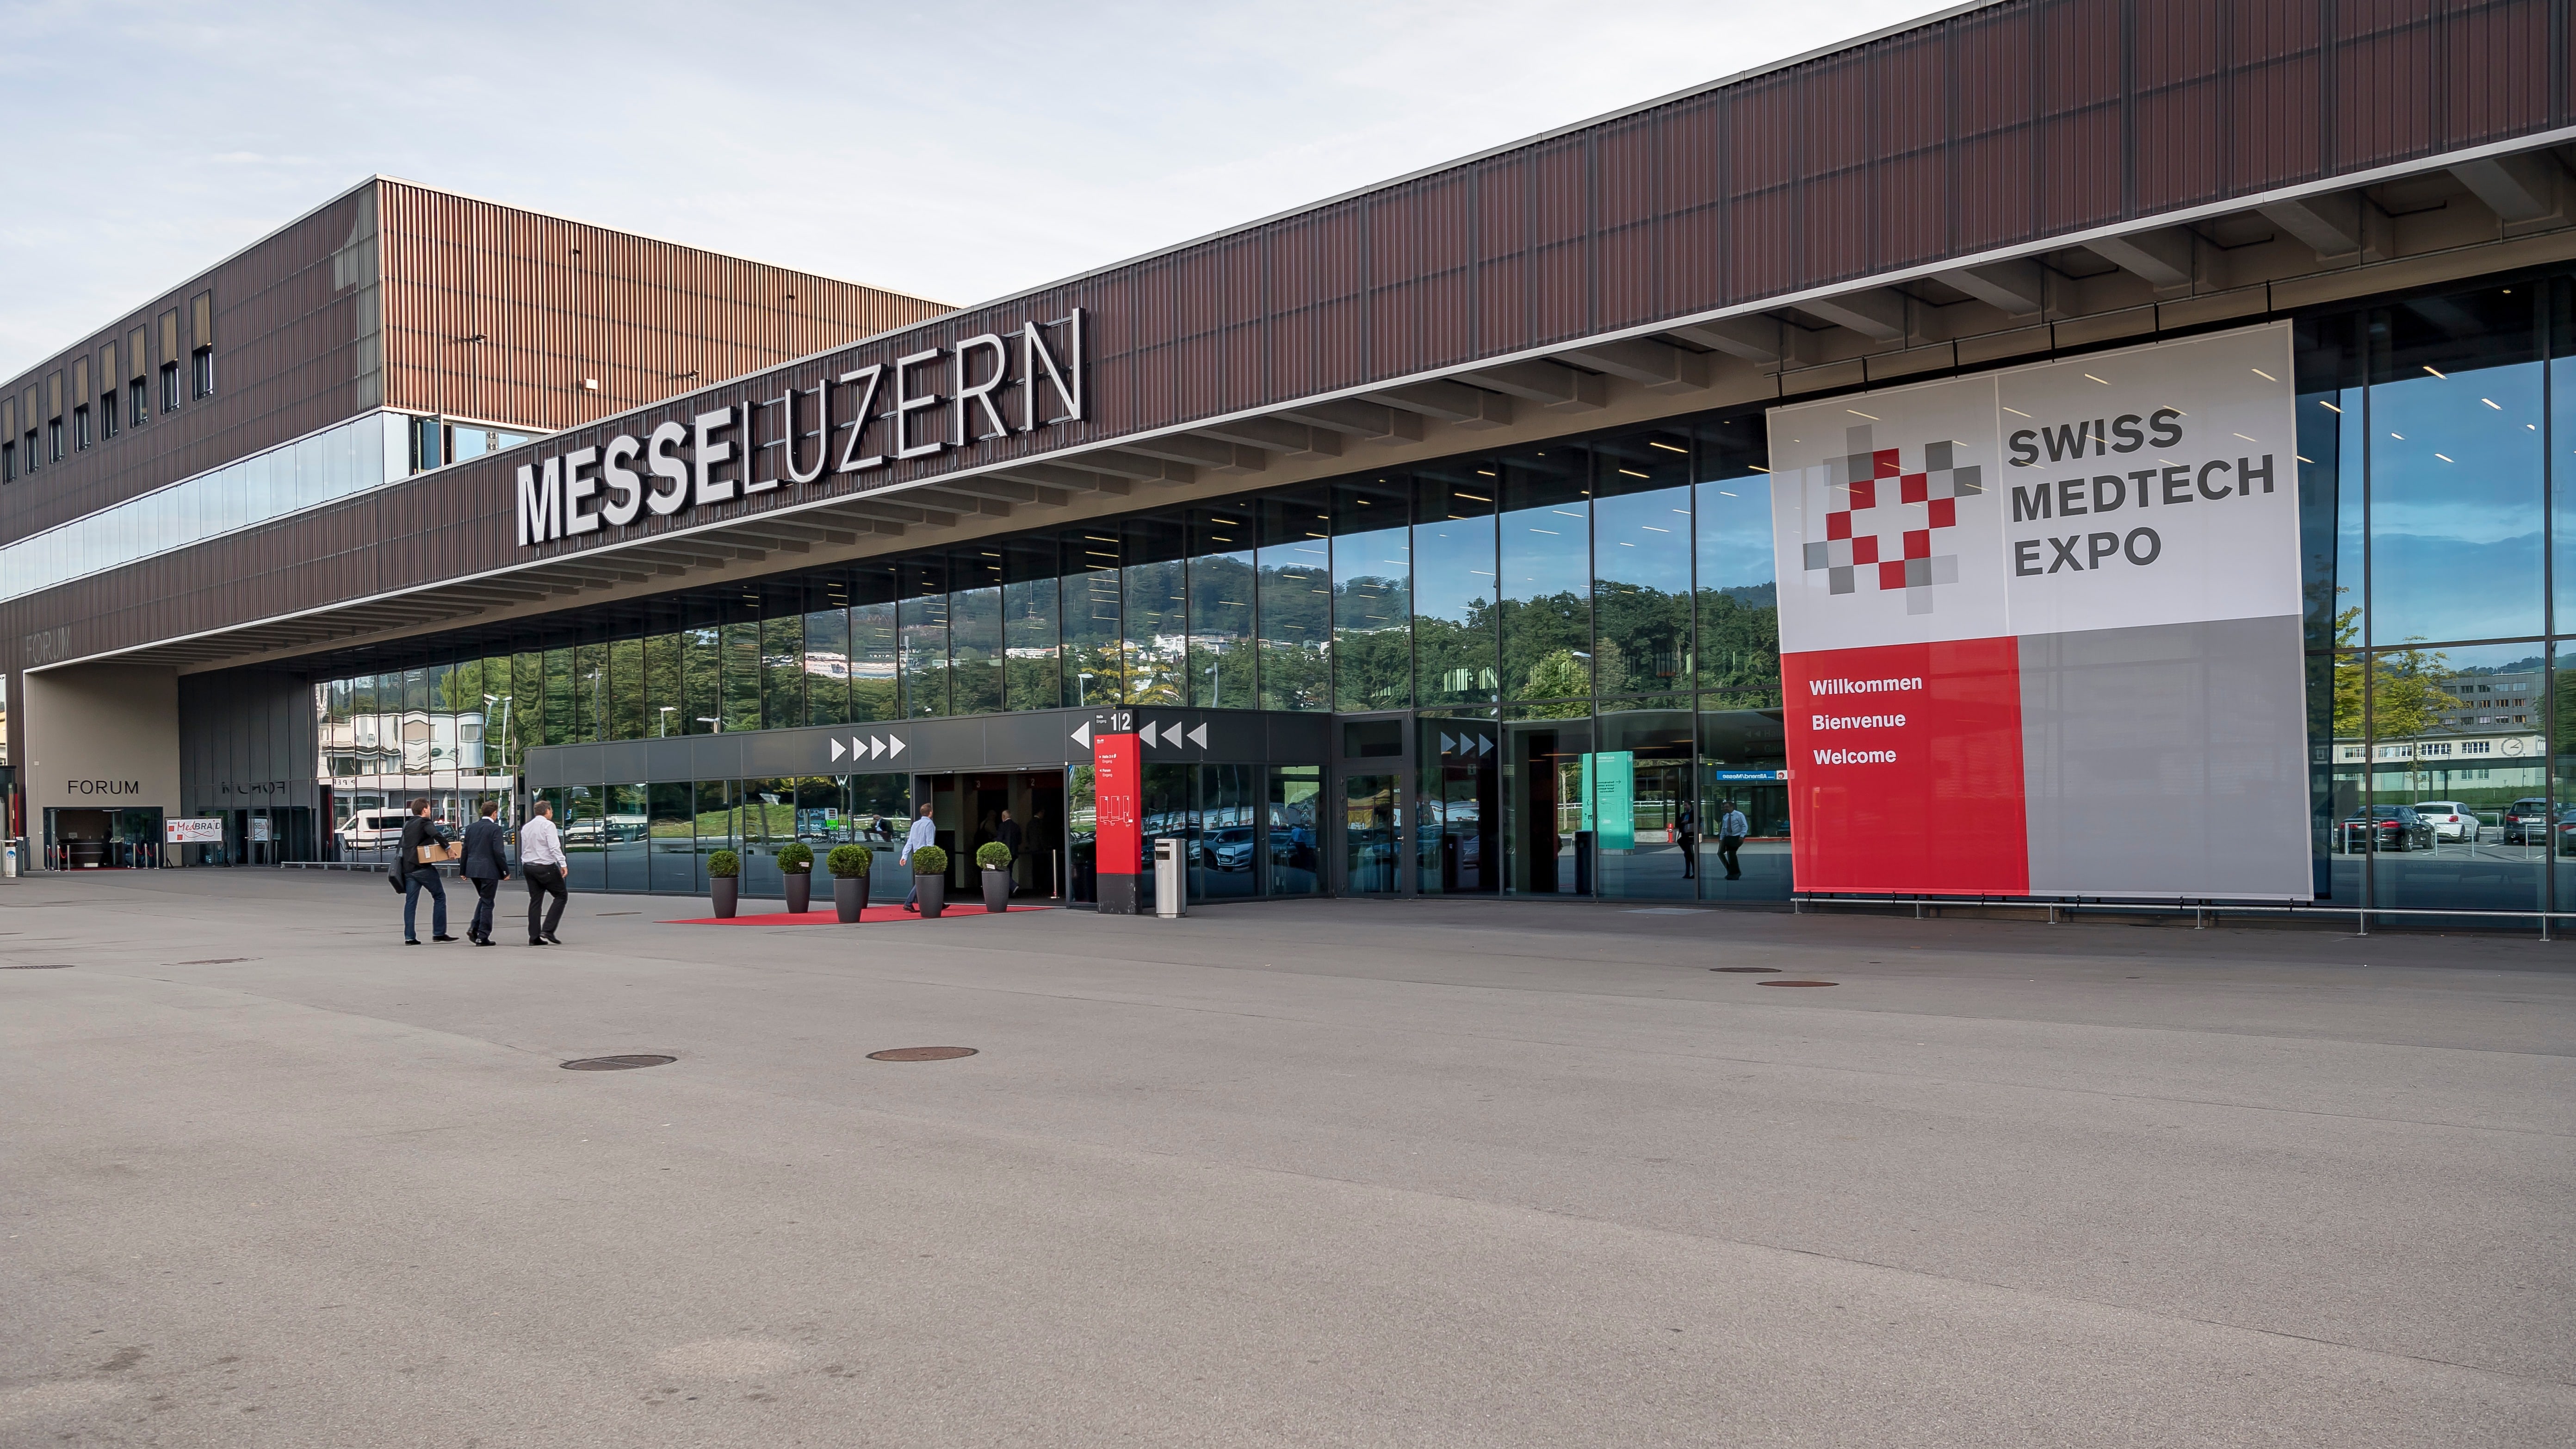 Swiss Medtech Expo will be held at Messe Luzern from September 14-15, 2021.